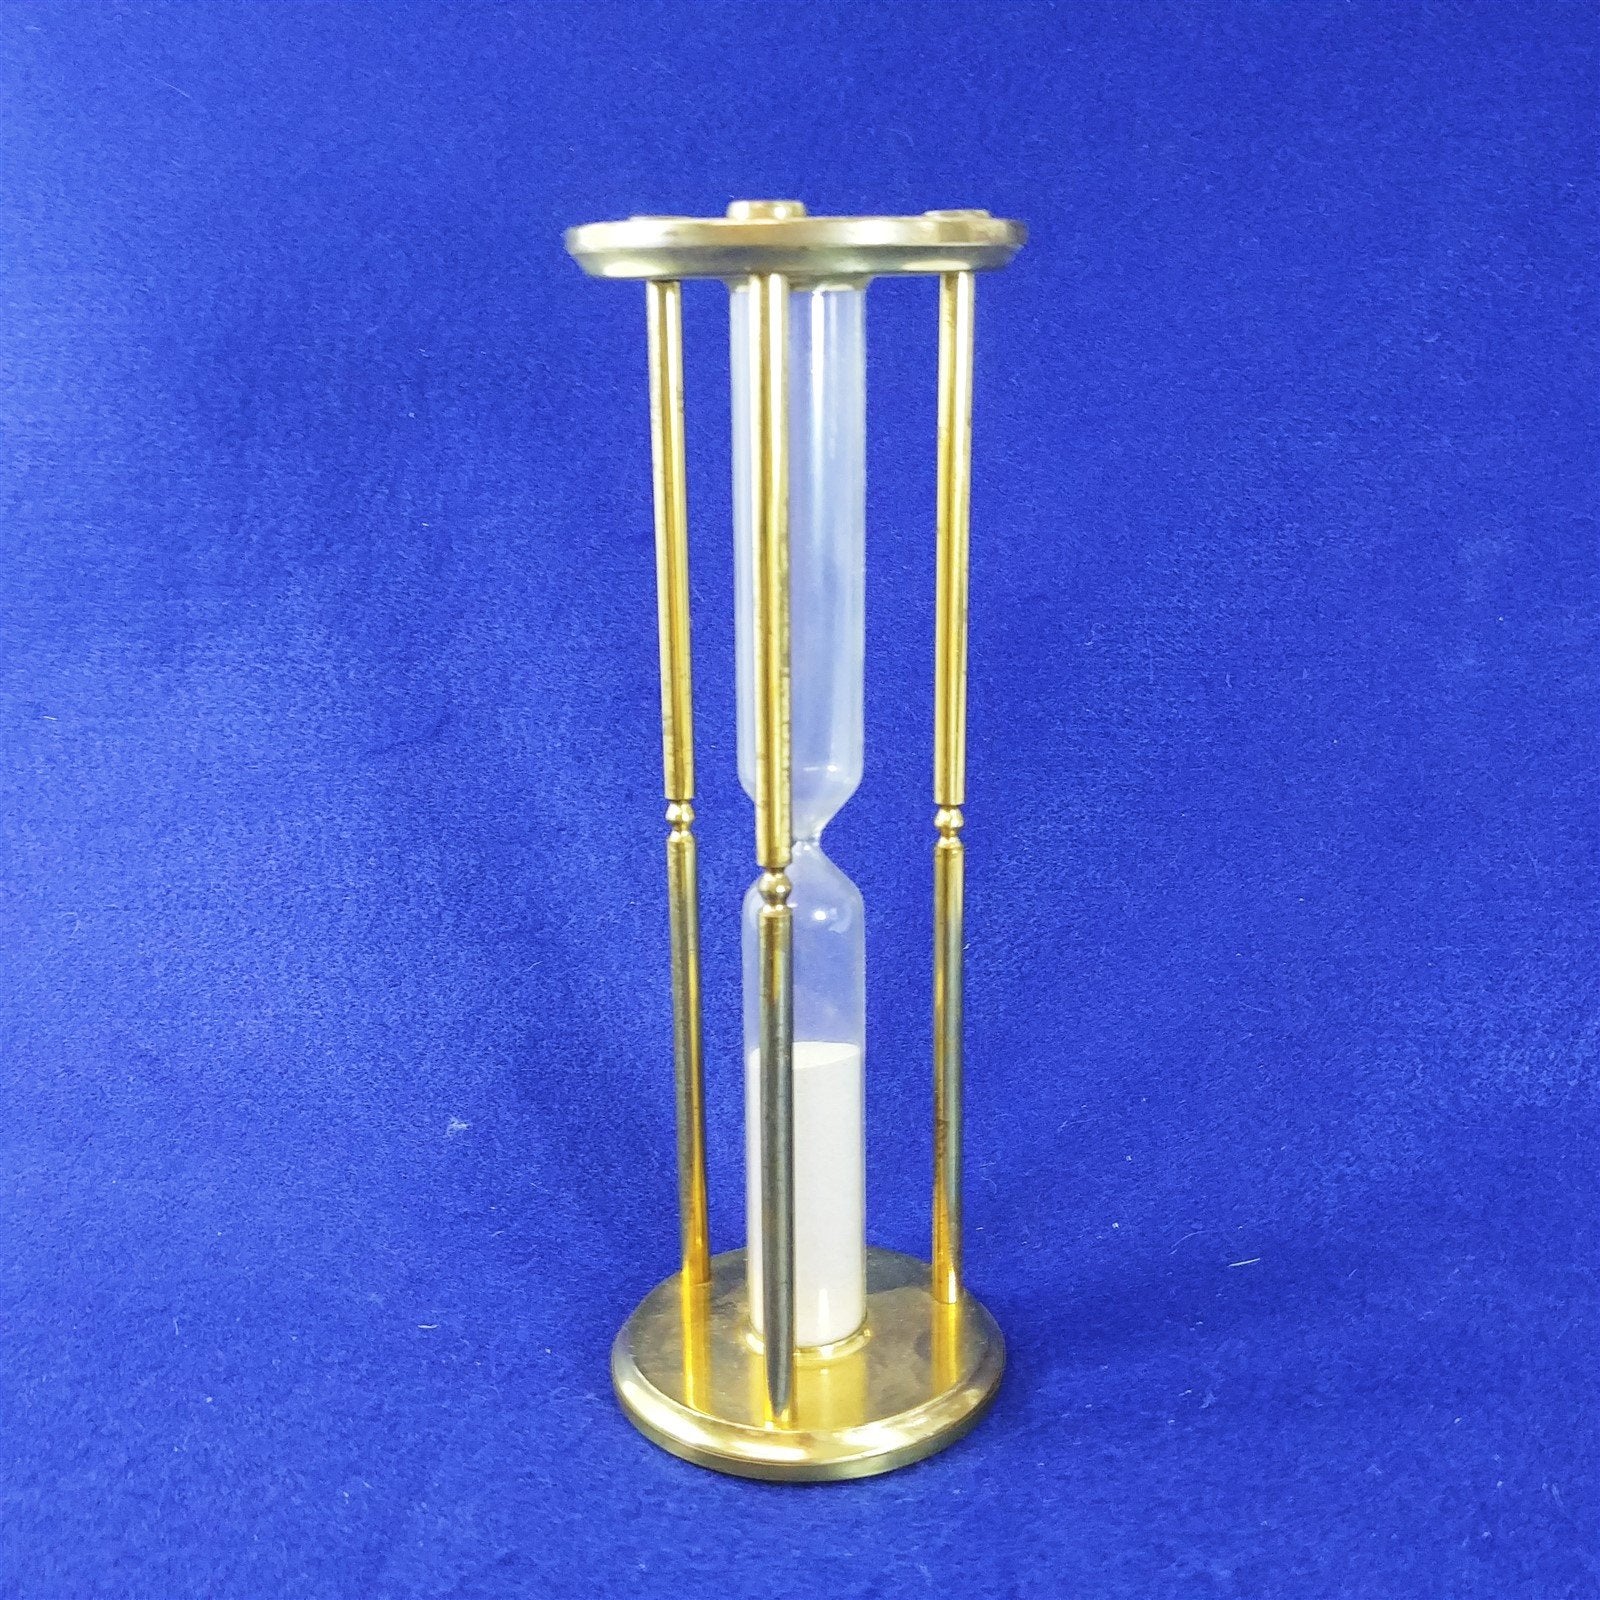 Hourglass Timer Made In England Brass 10.5" Vintage Home Decor